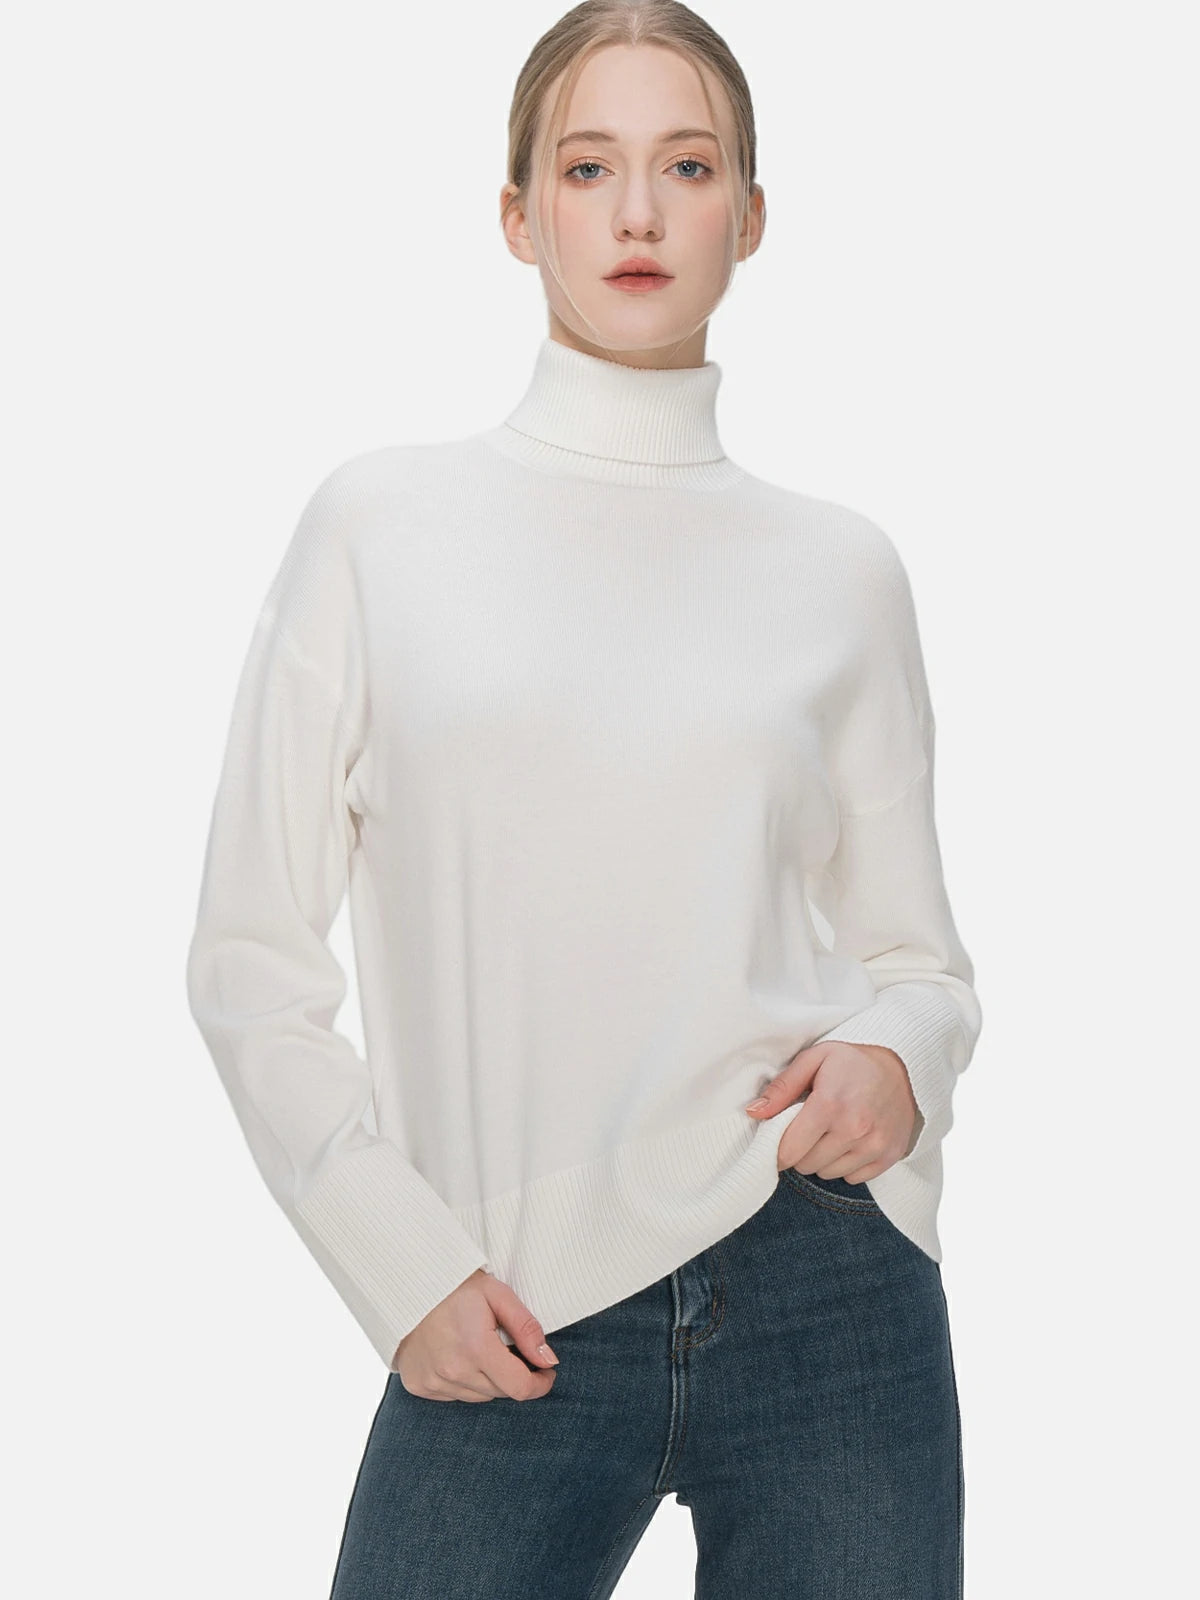 Elevate your style with this simple and elegant white turtleneck sweater, featuring a classic turtleneck design and intricate knit texture.